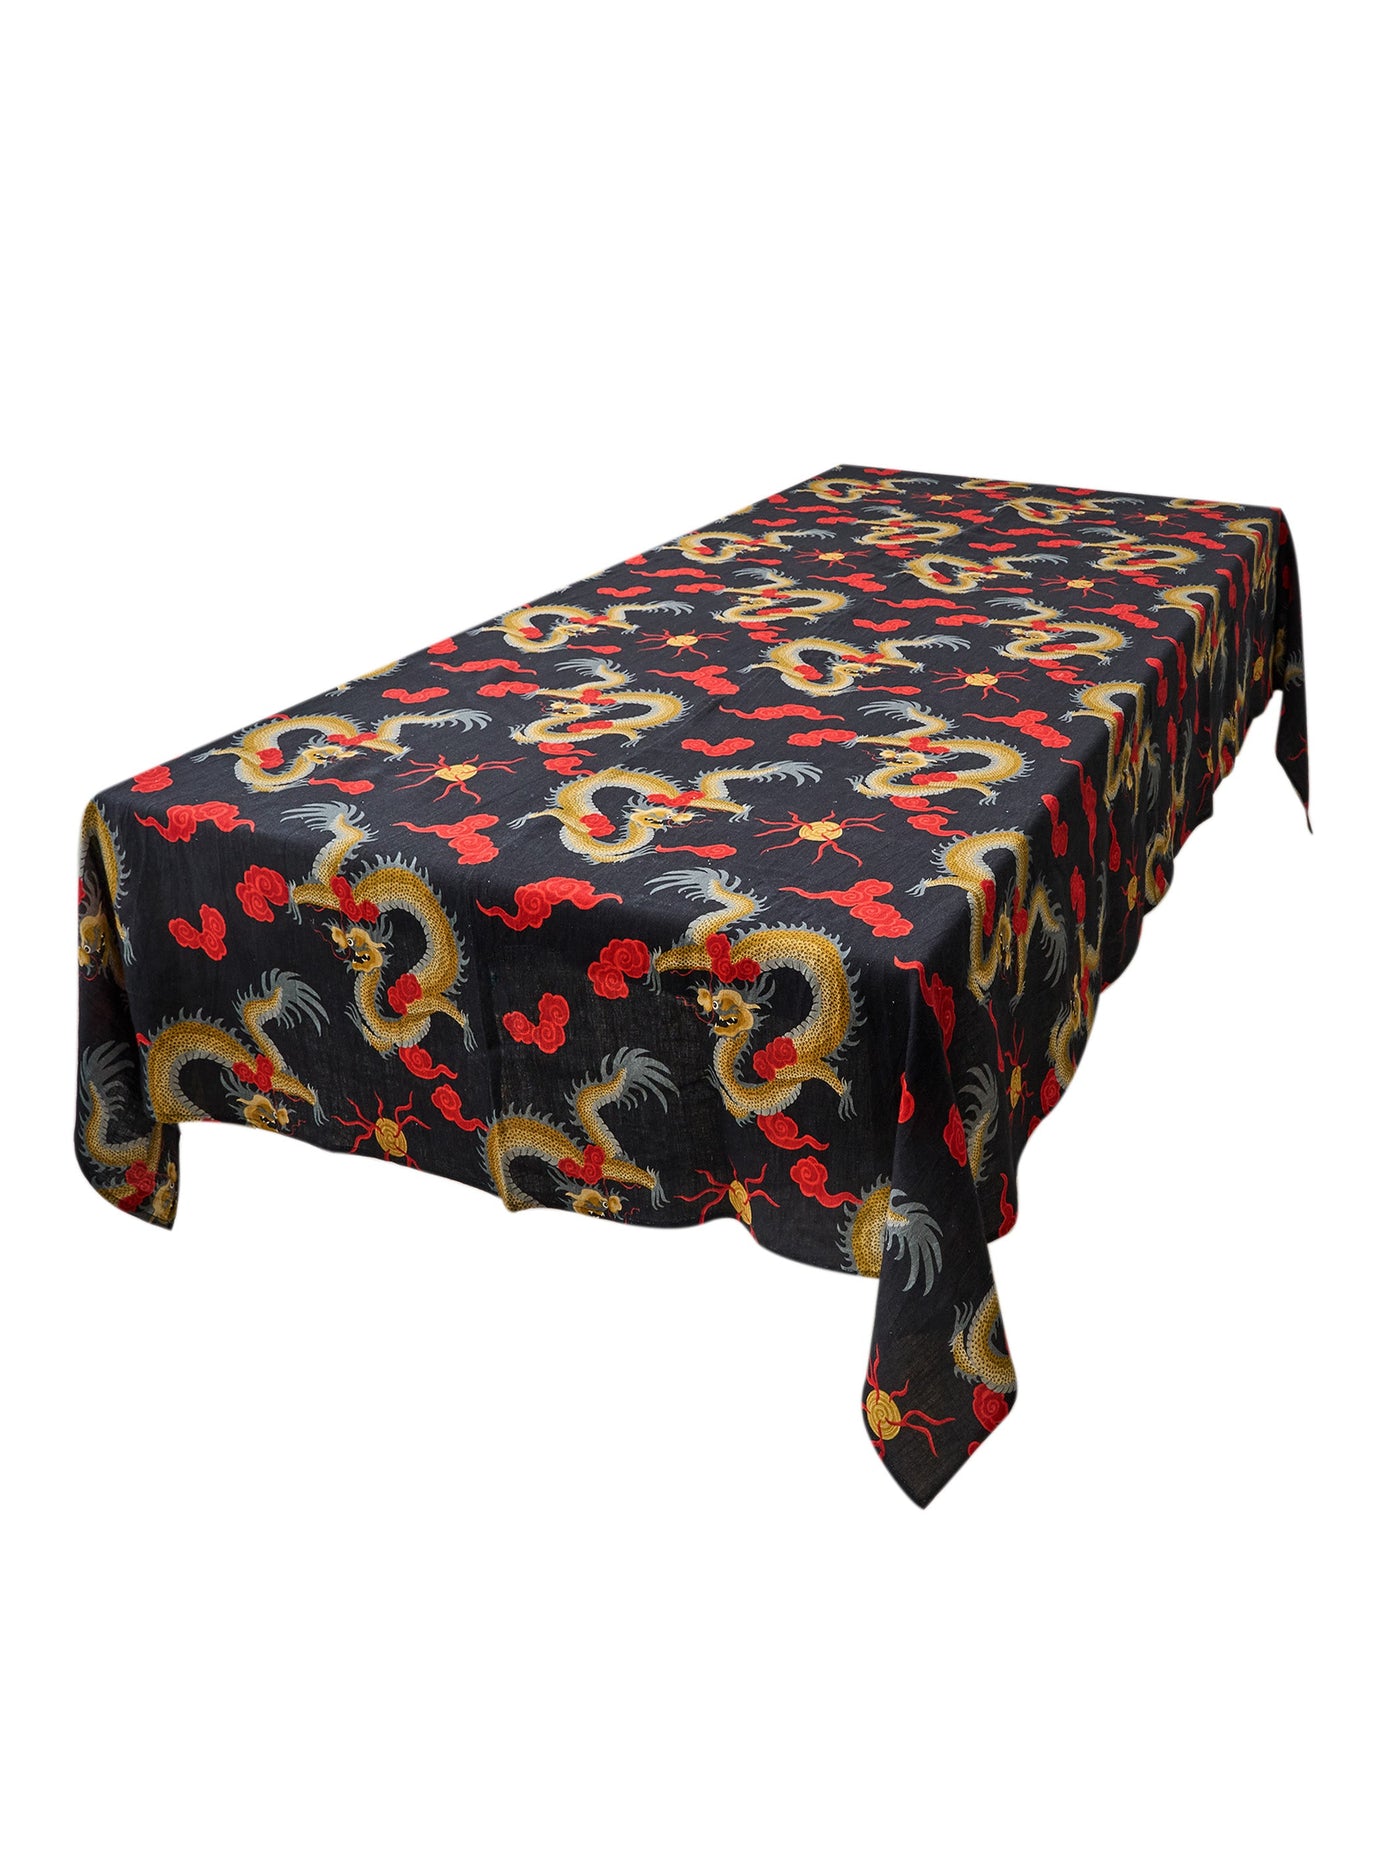 Kowloon Tablecloth in Onyx